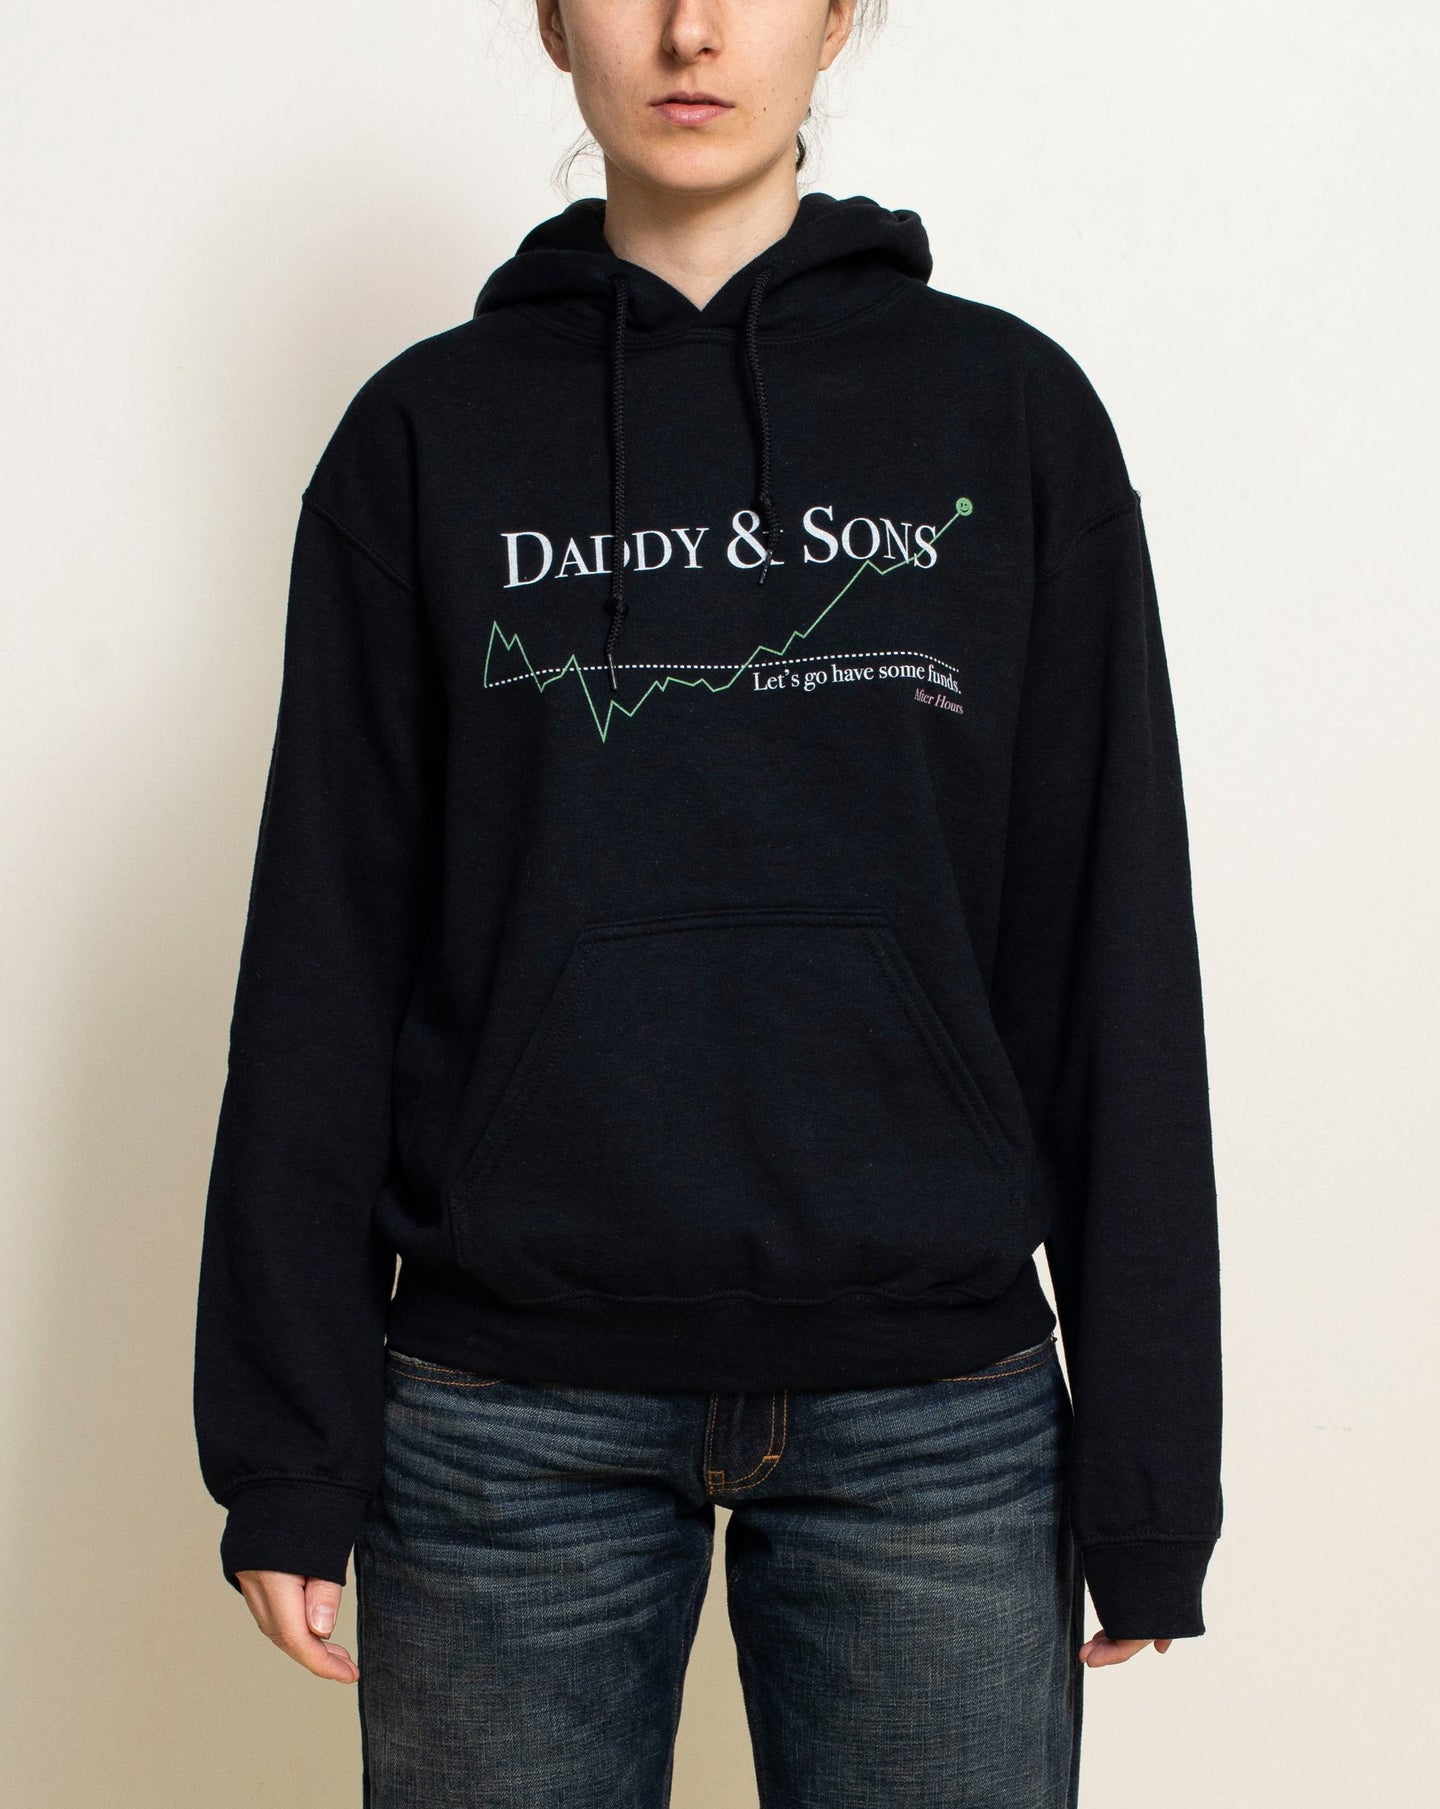 Daddy and Sons - Hoodie